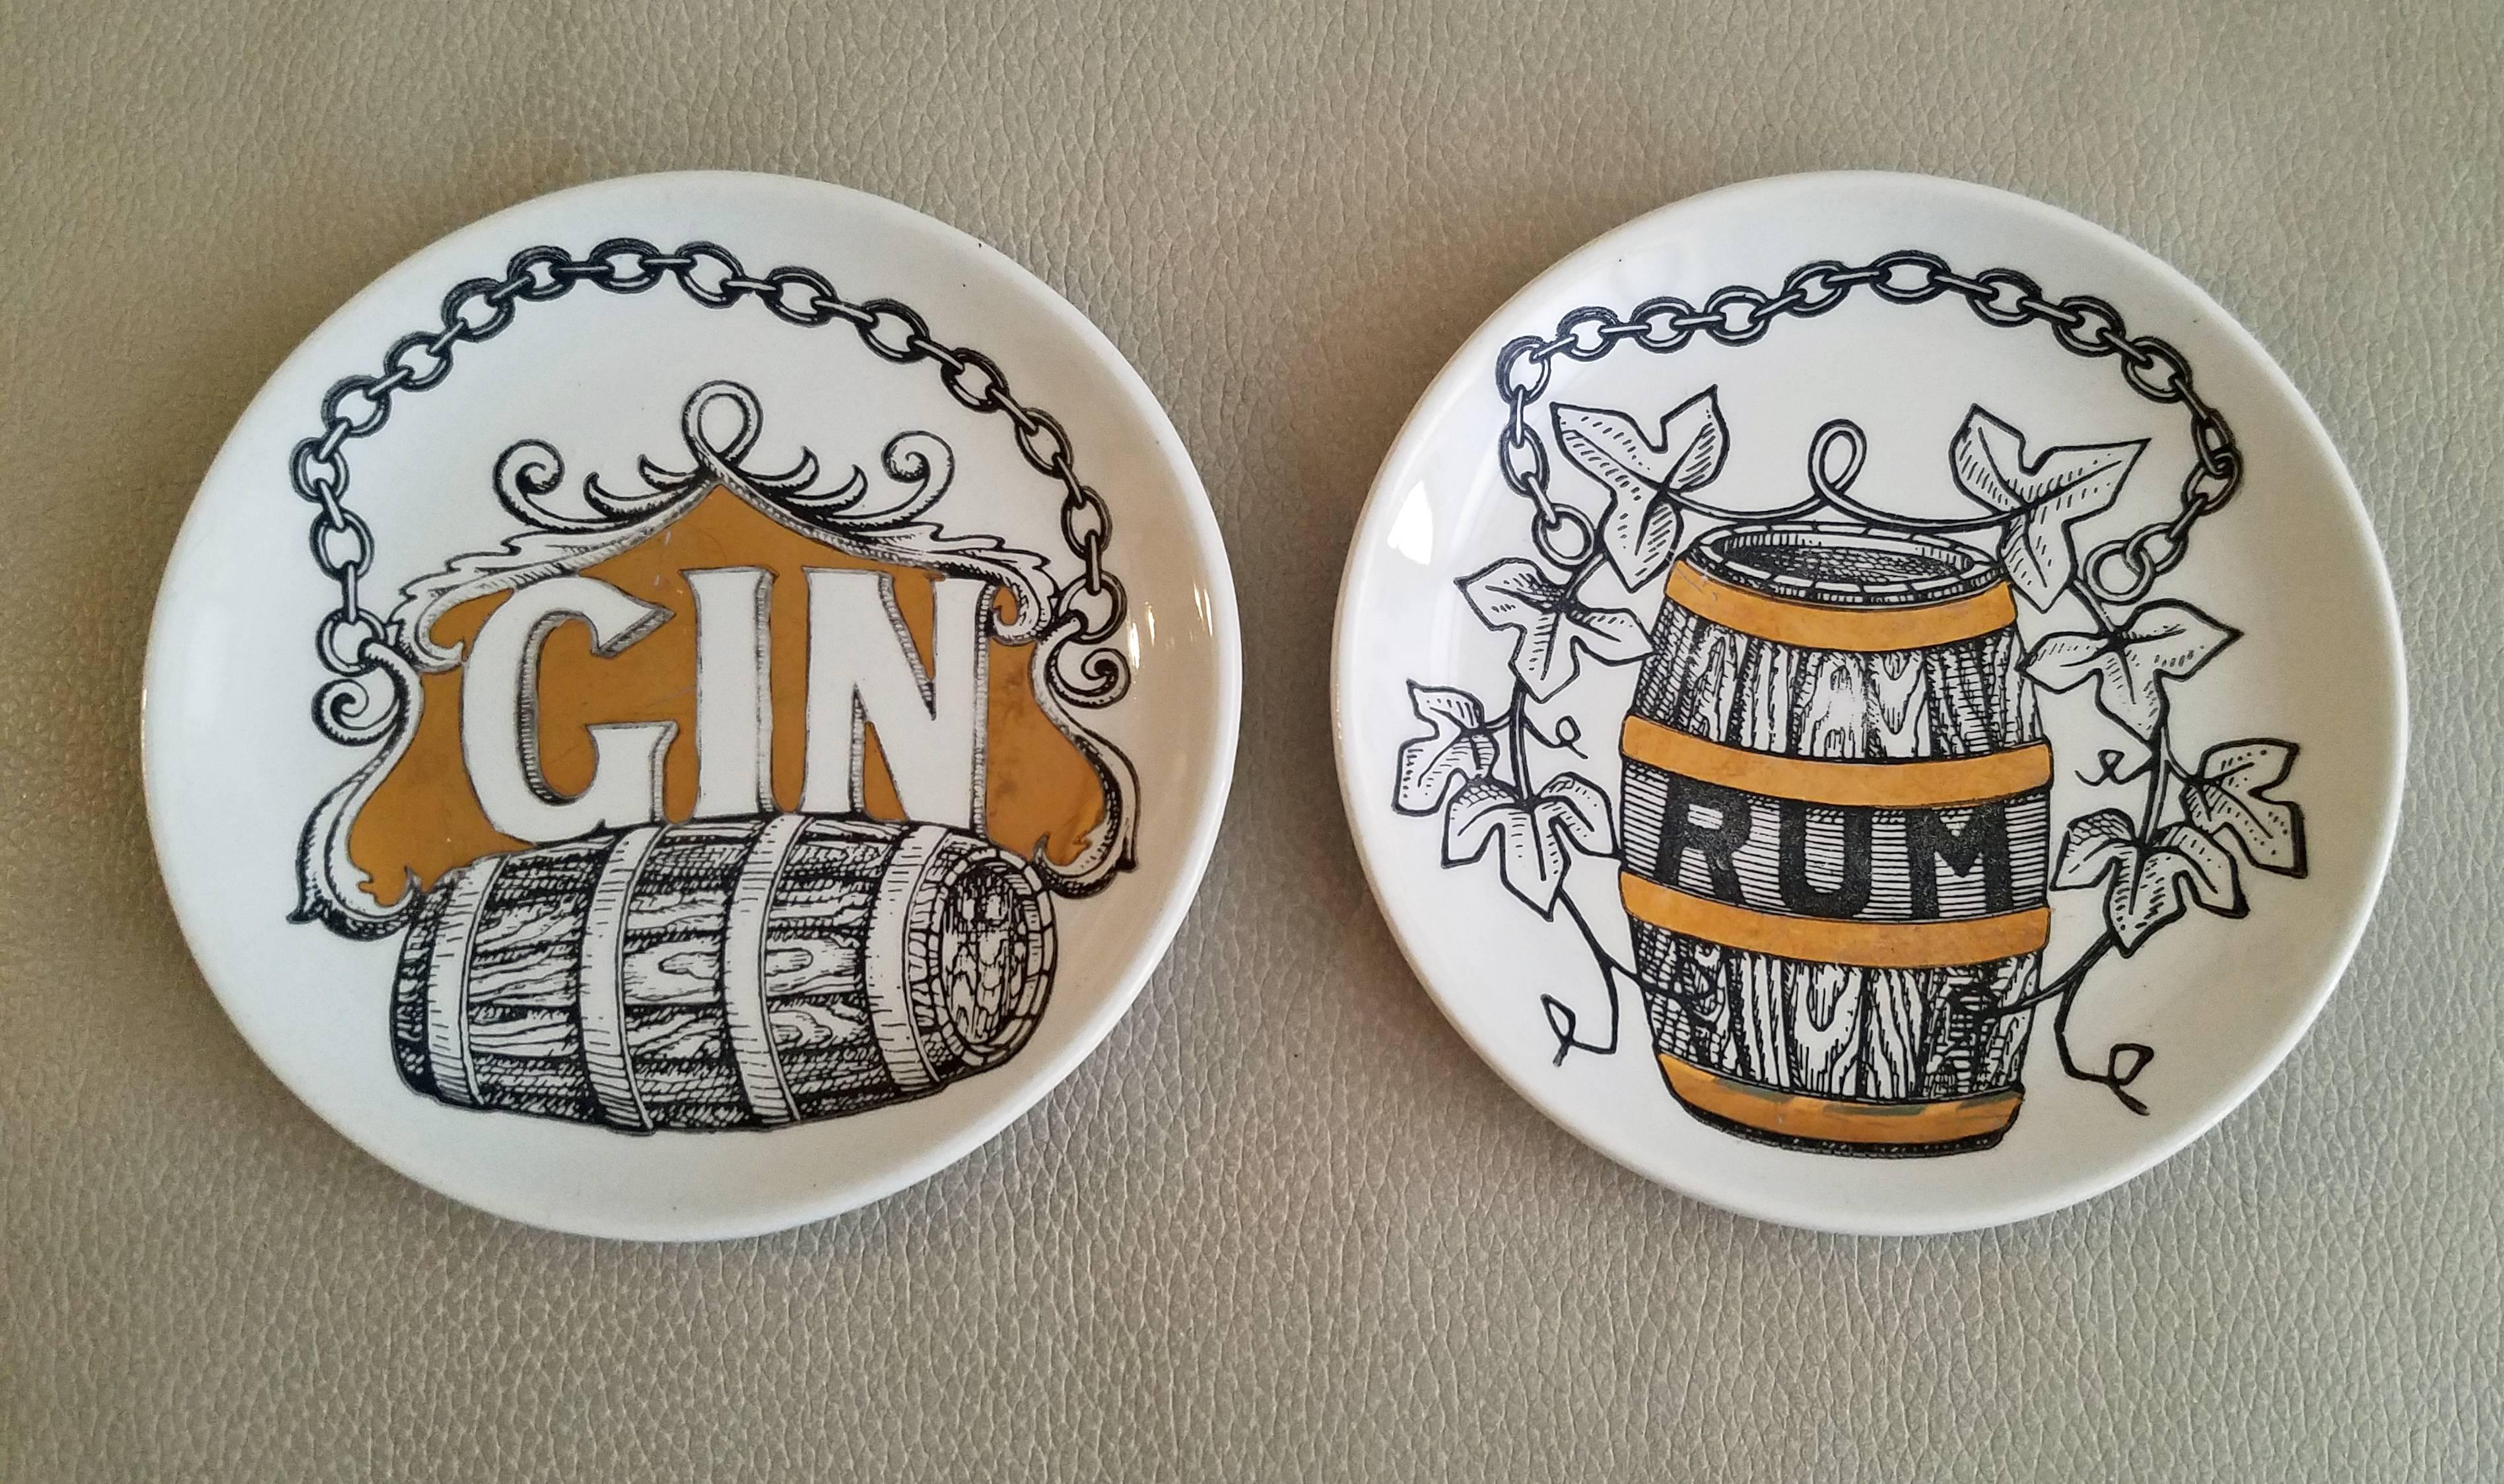 The charming complete set of coasters includes Gin, Rum, Sherry, Madeira, Port, Rhenish, Brandy and Whiskey. Each coaster is printed in black and white and highlighted in gilt.

Mark: The name of pattern-Vini E Liquori within a bottle, the